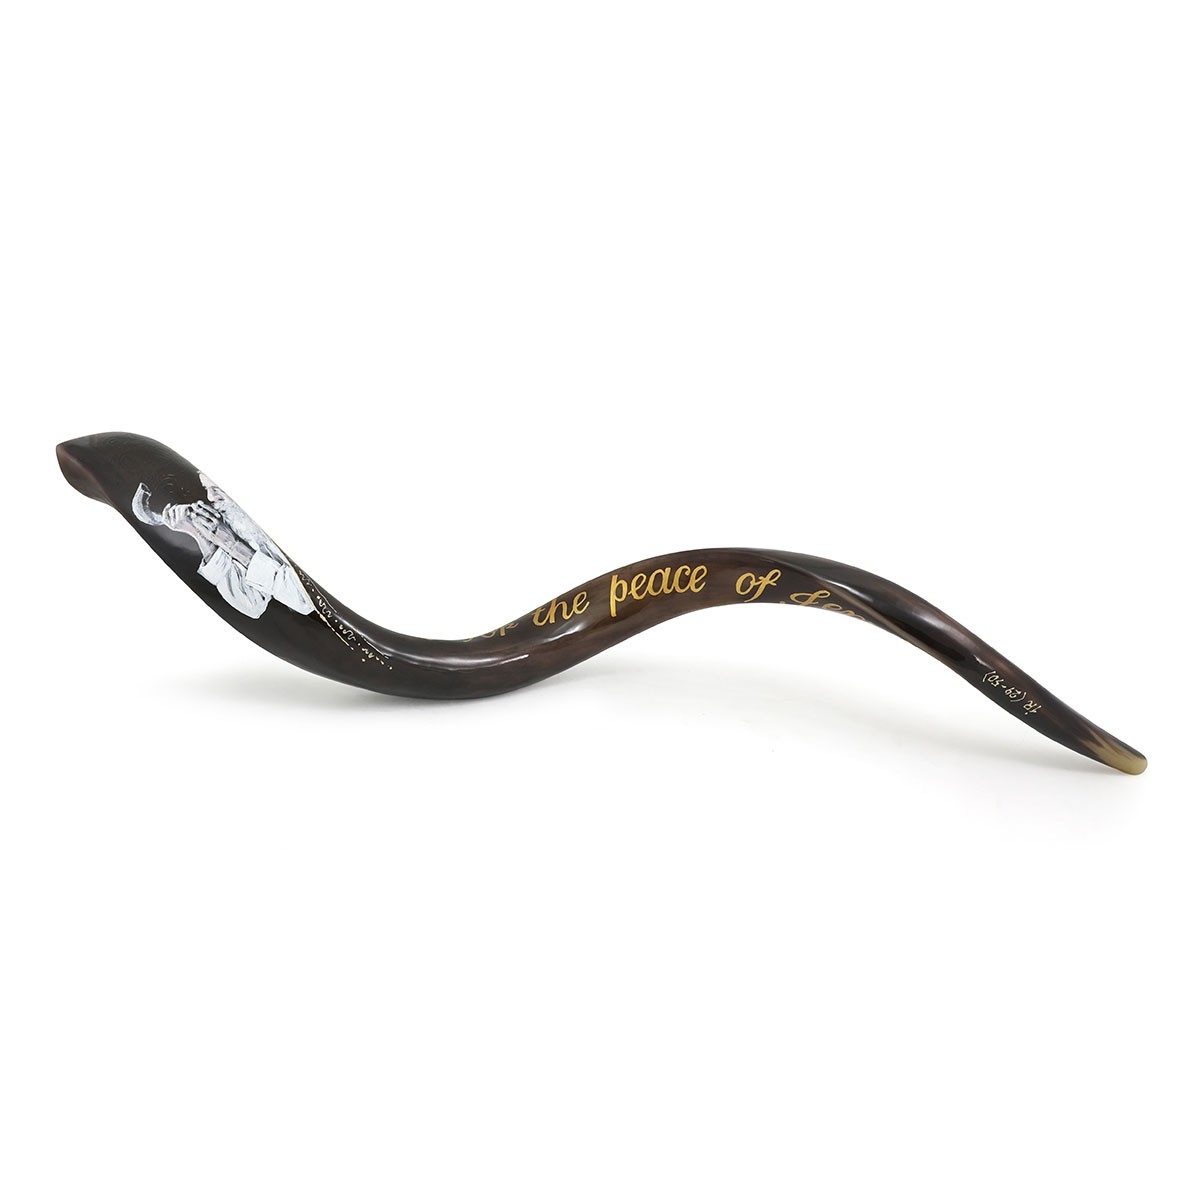 Hand Painted Kudu Shofar Horn with Pray for Peace of Jerusalem Inscription  - 1